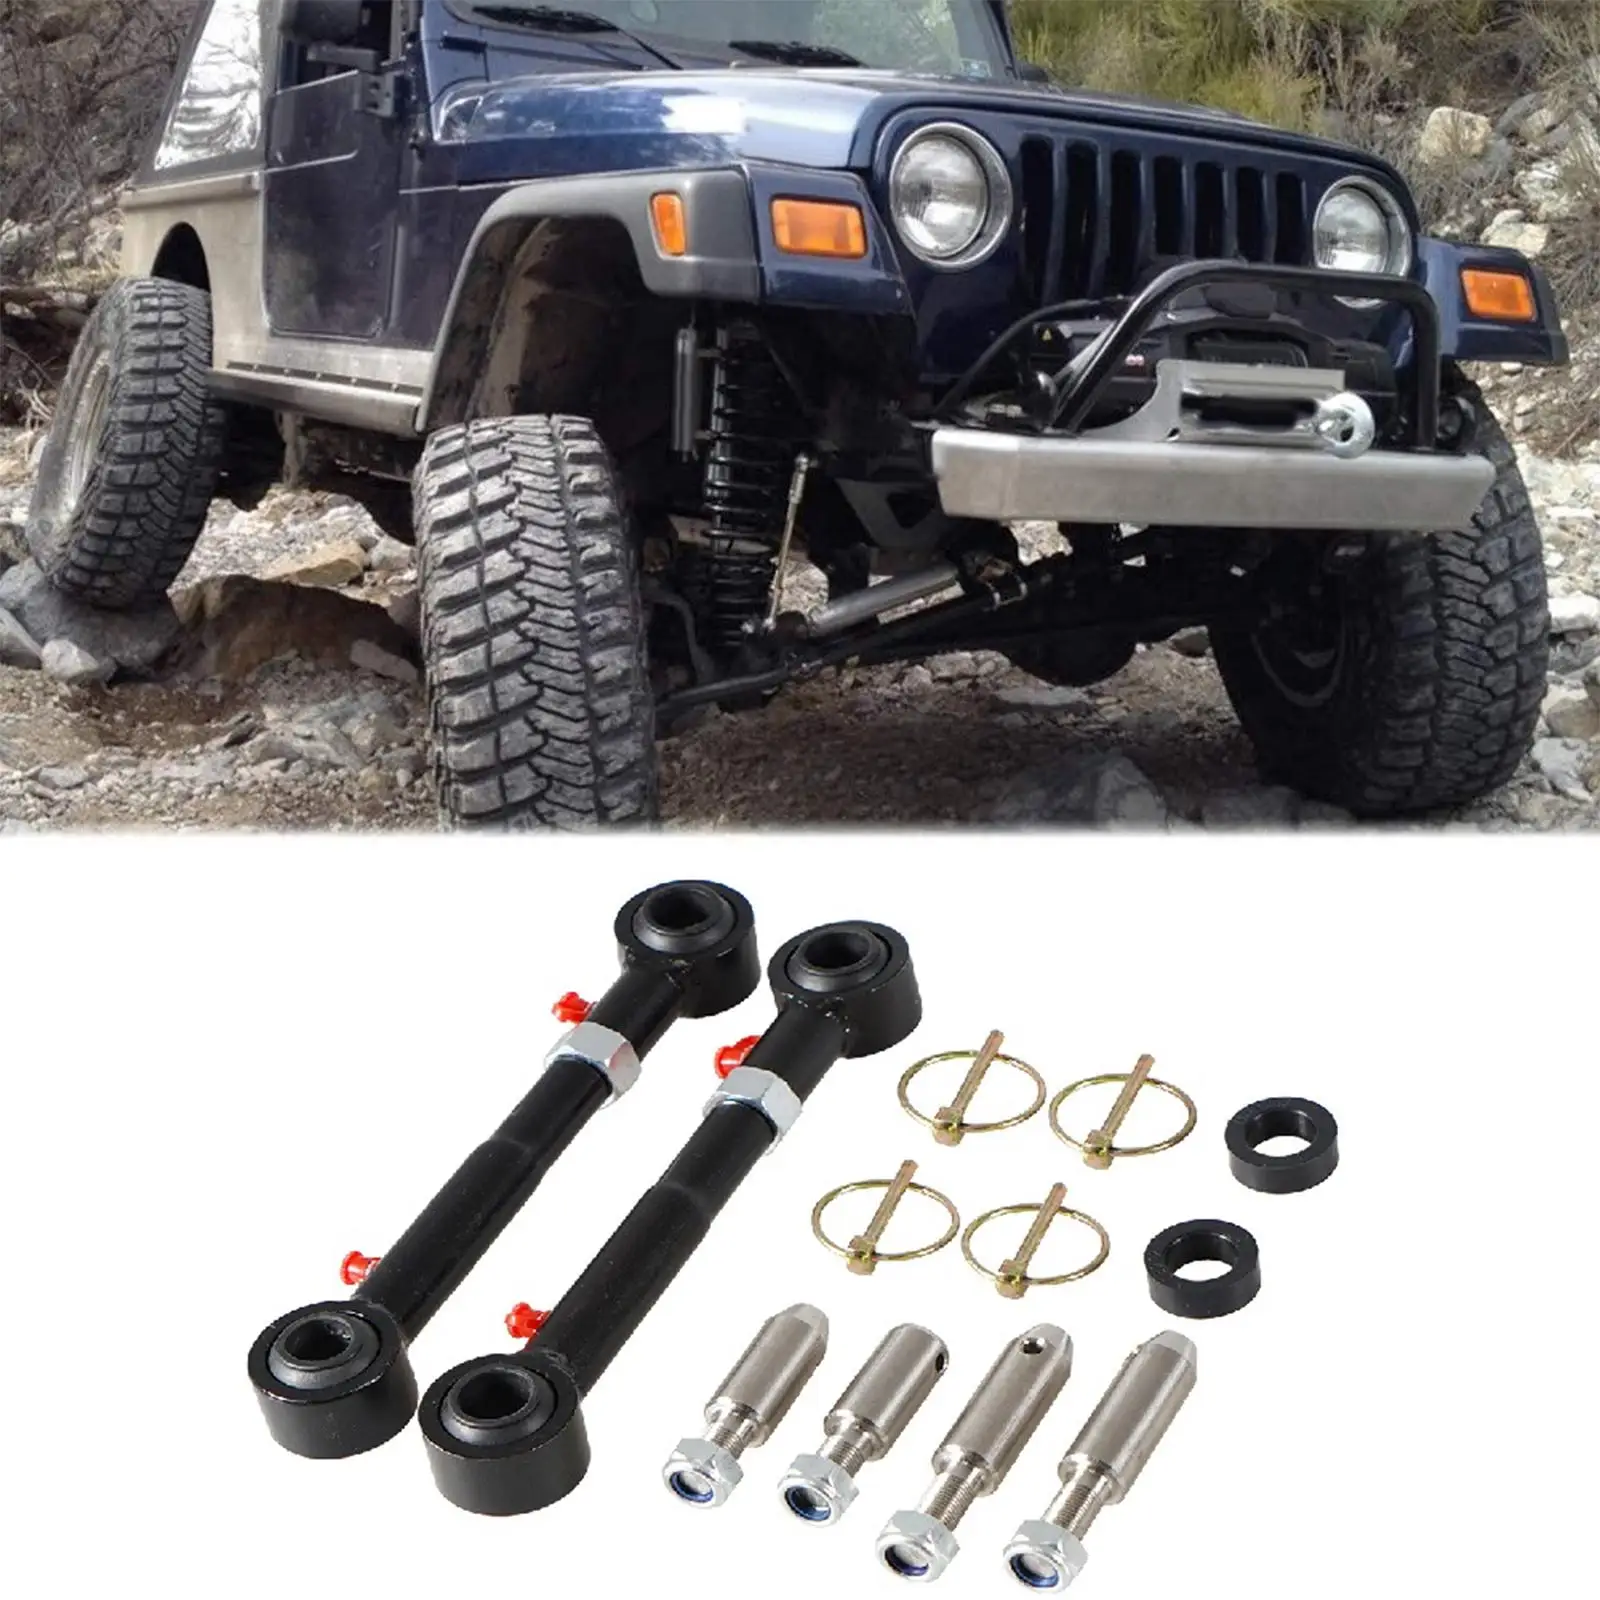 Adjustable Front Sway Bar Links Disconnects Stainless Steel for Jeep  Wrangler JK Jku 2/4 Doors 2007 18 Parts Replaces Car| | - AliExpress